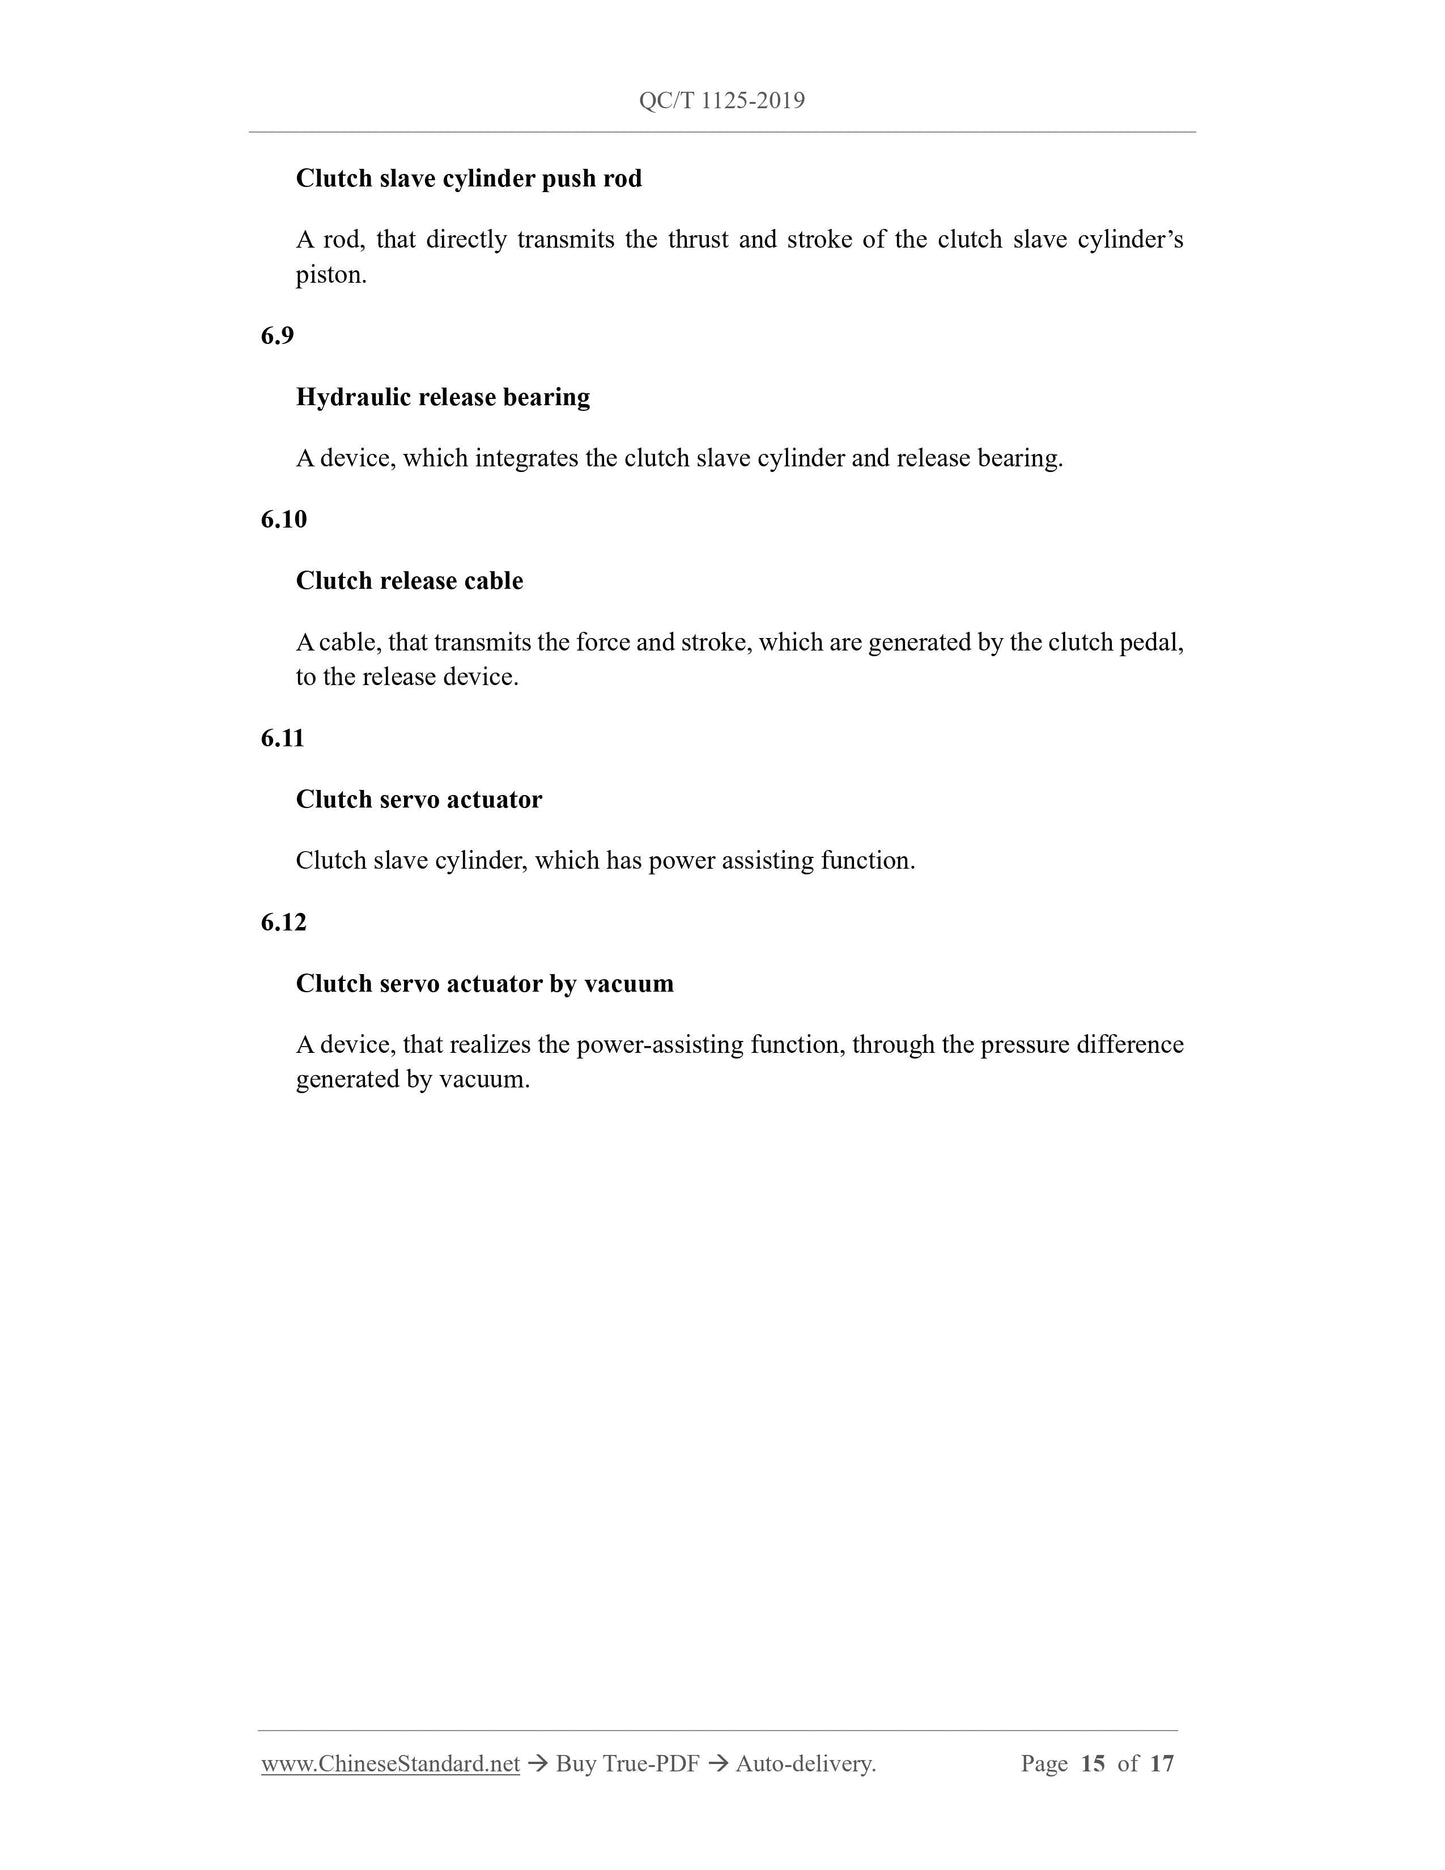 QC/T 1125-2019 Page 7